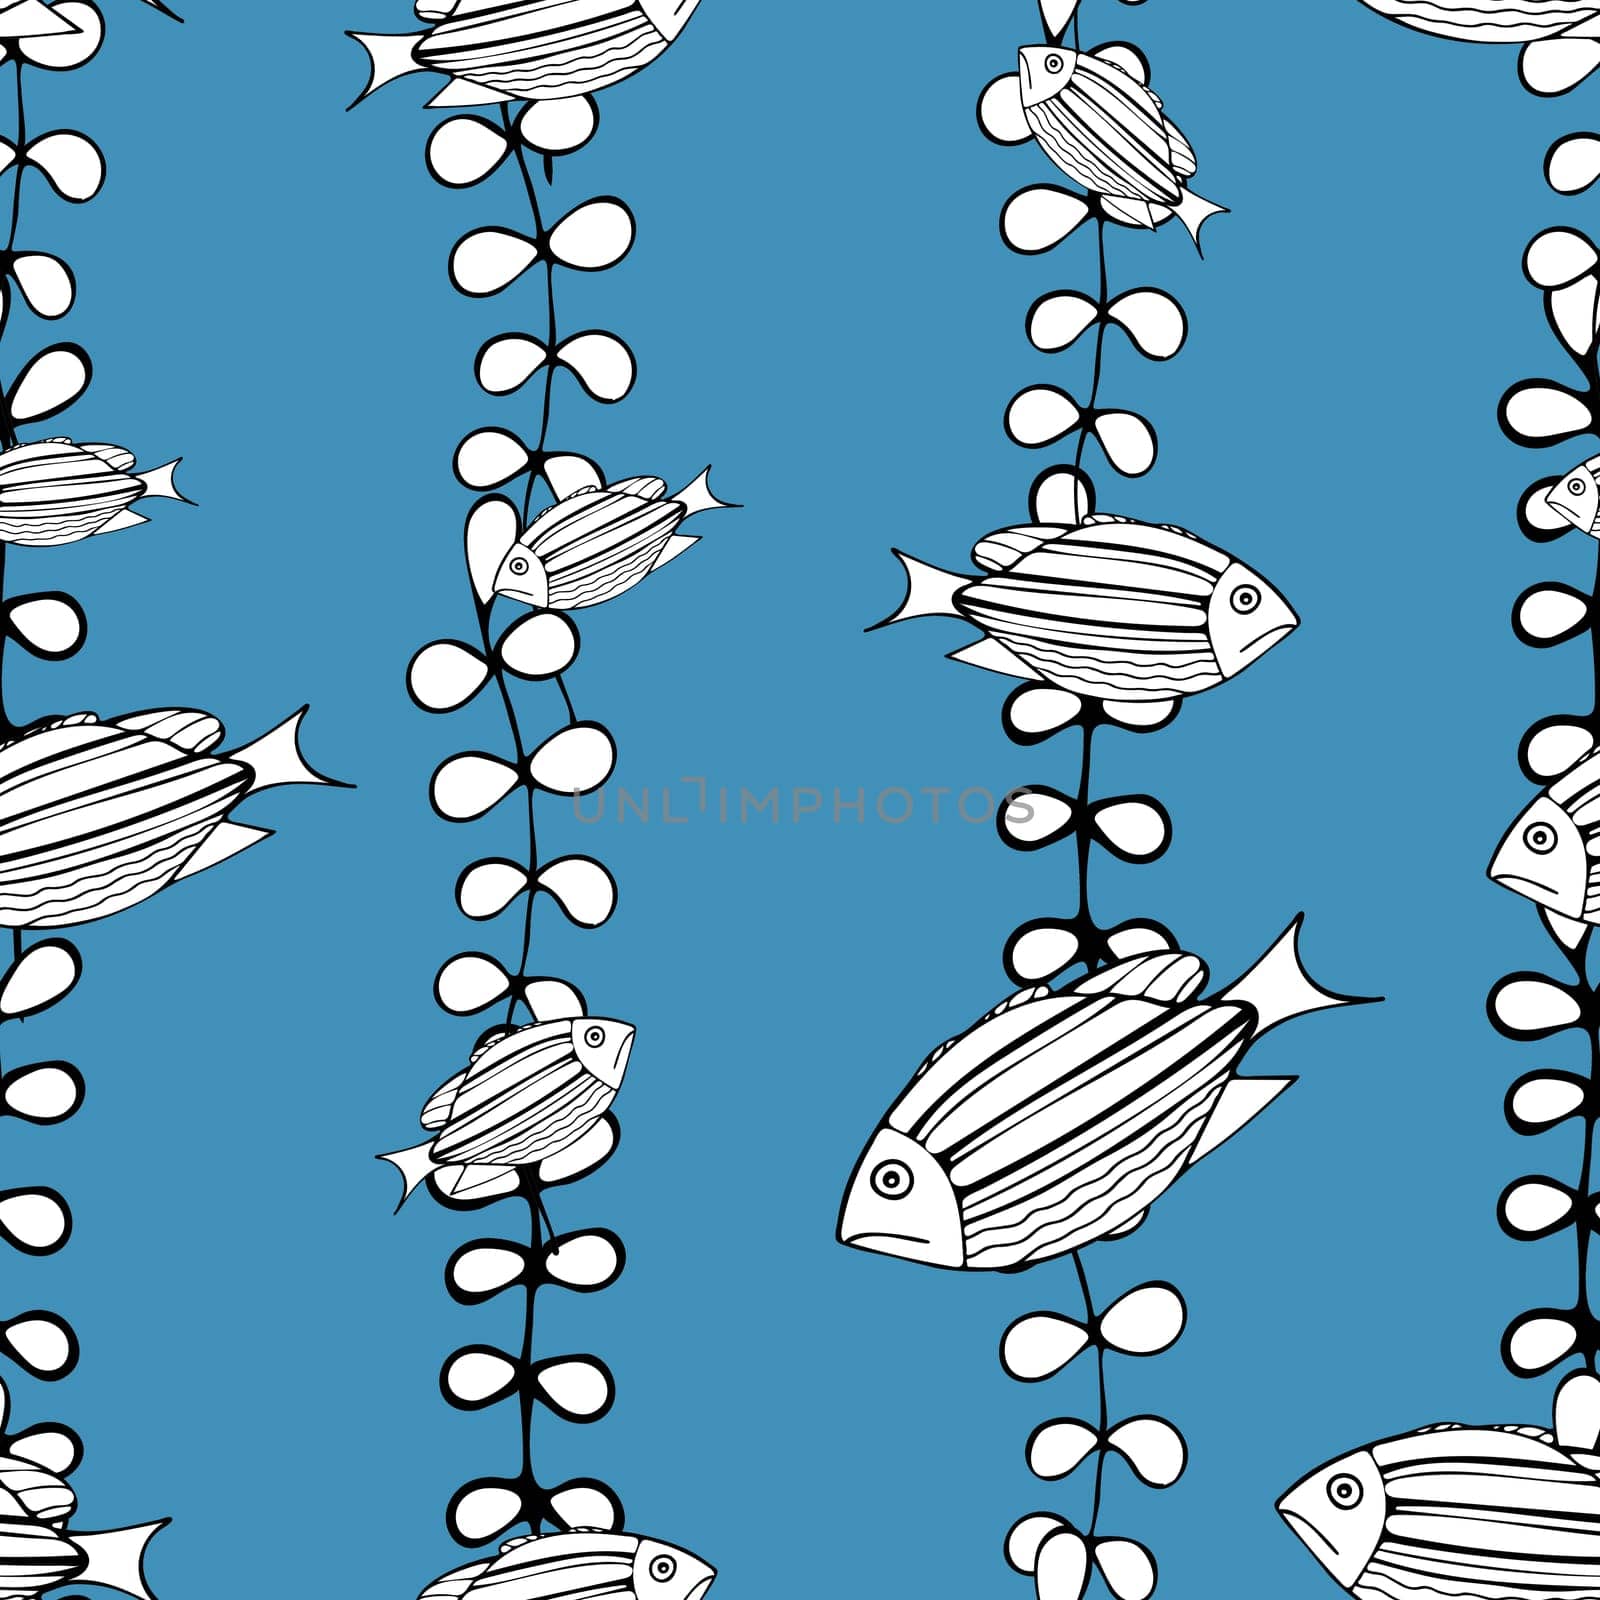 Hand Drawn Black and White Fish on Blue Background. Seamless Pattern with Fishes. Sea Animal Digital Papers.